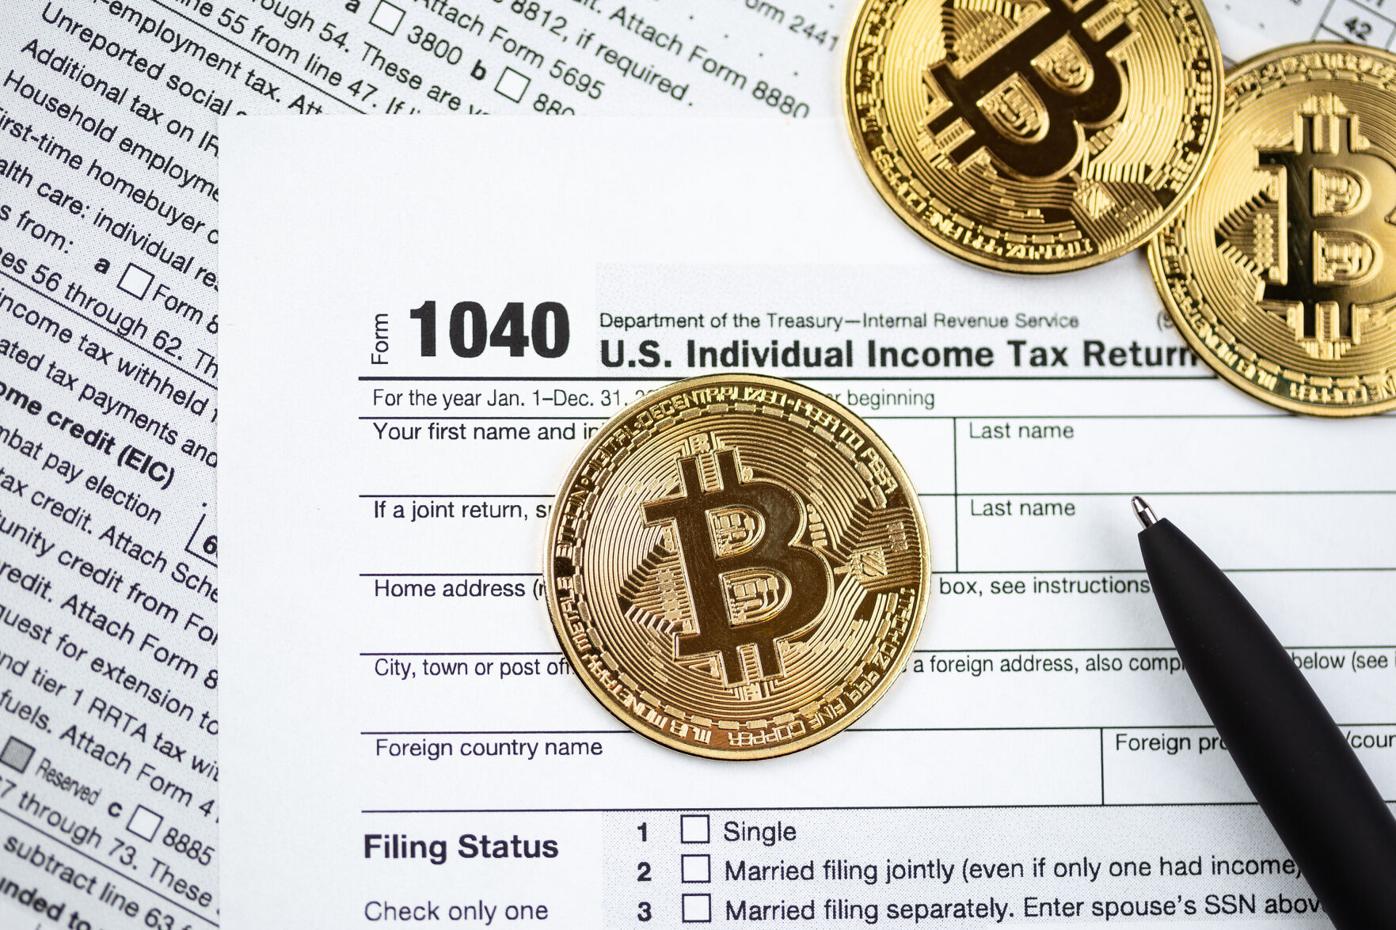 Crypto payments above $10,000 would be reported to IRS under